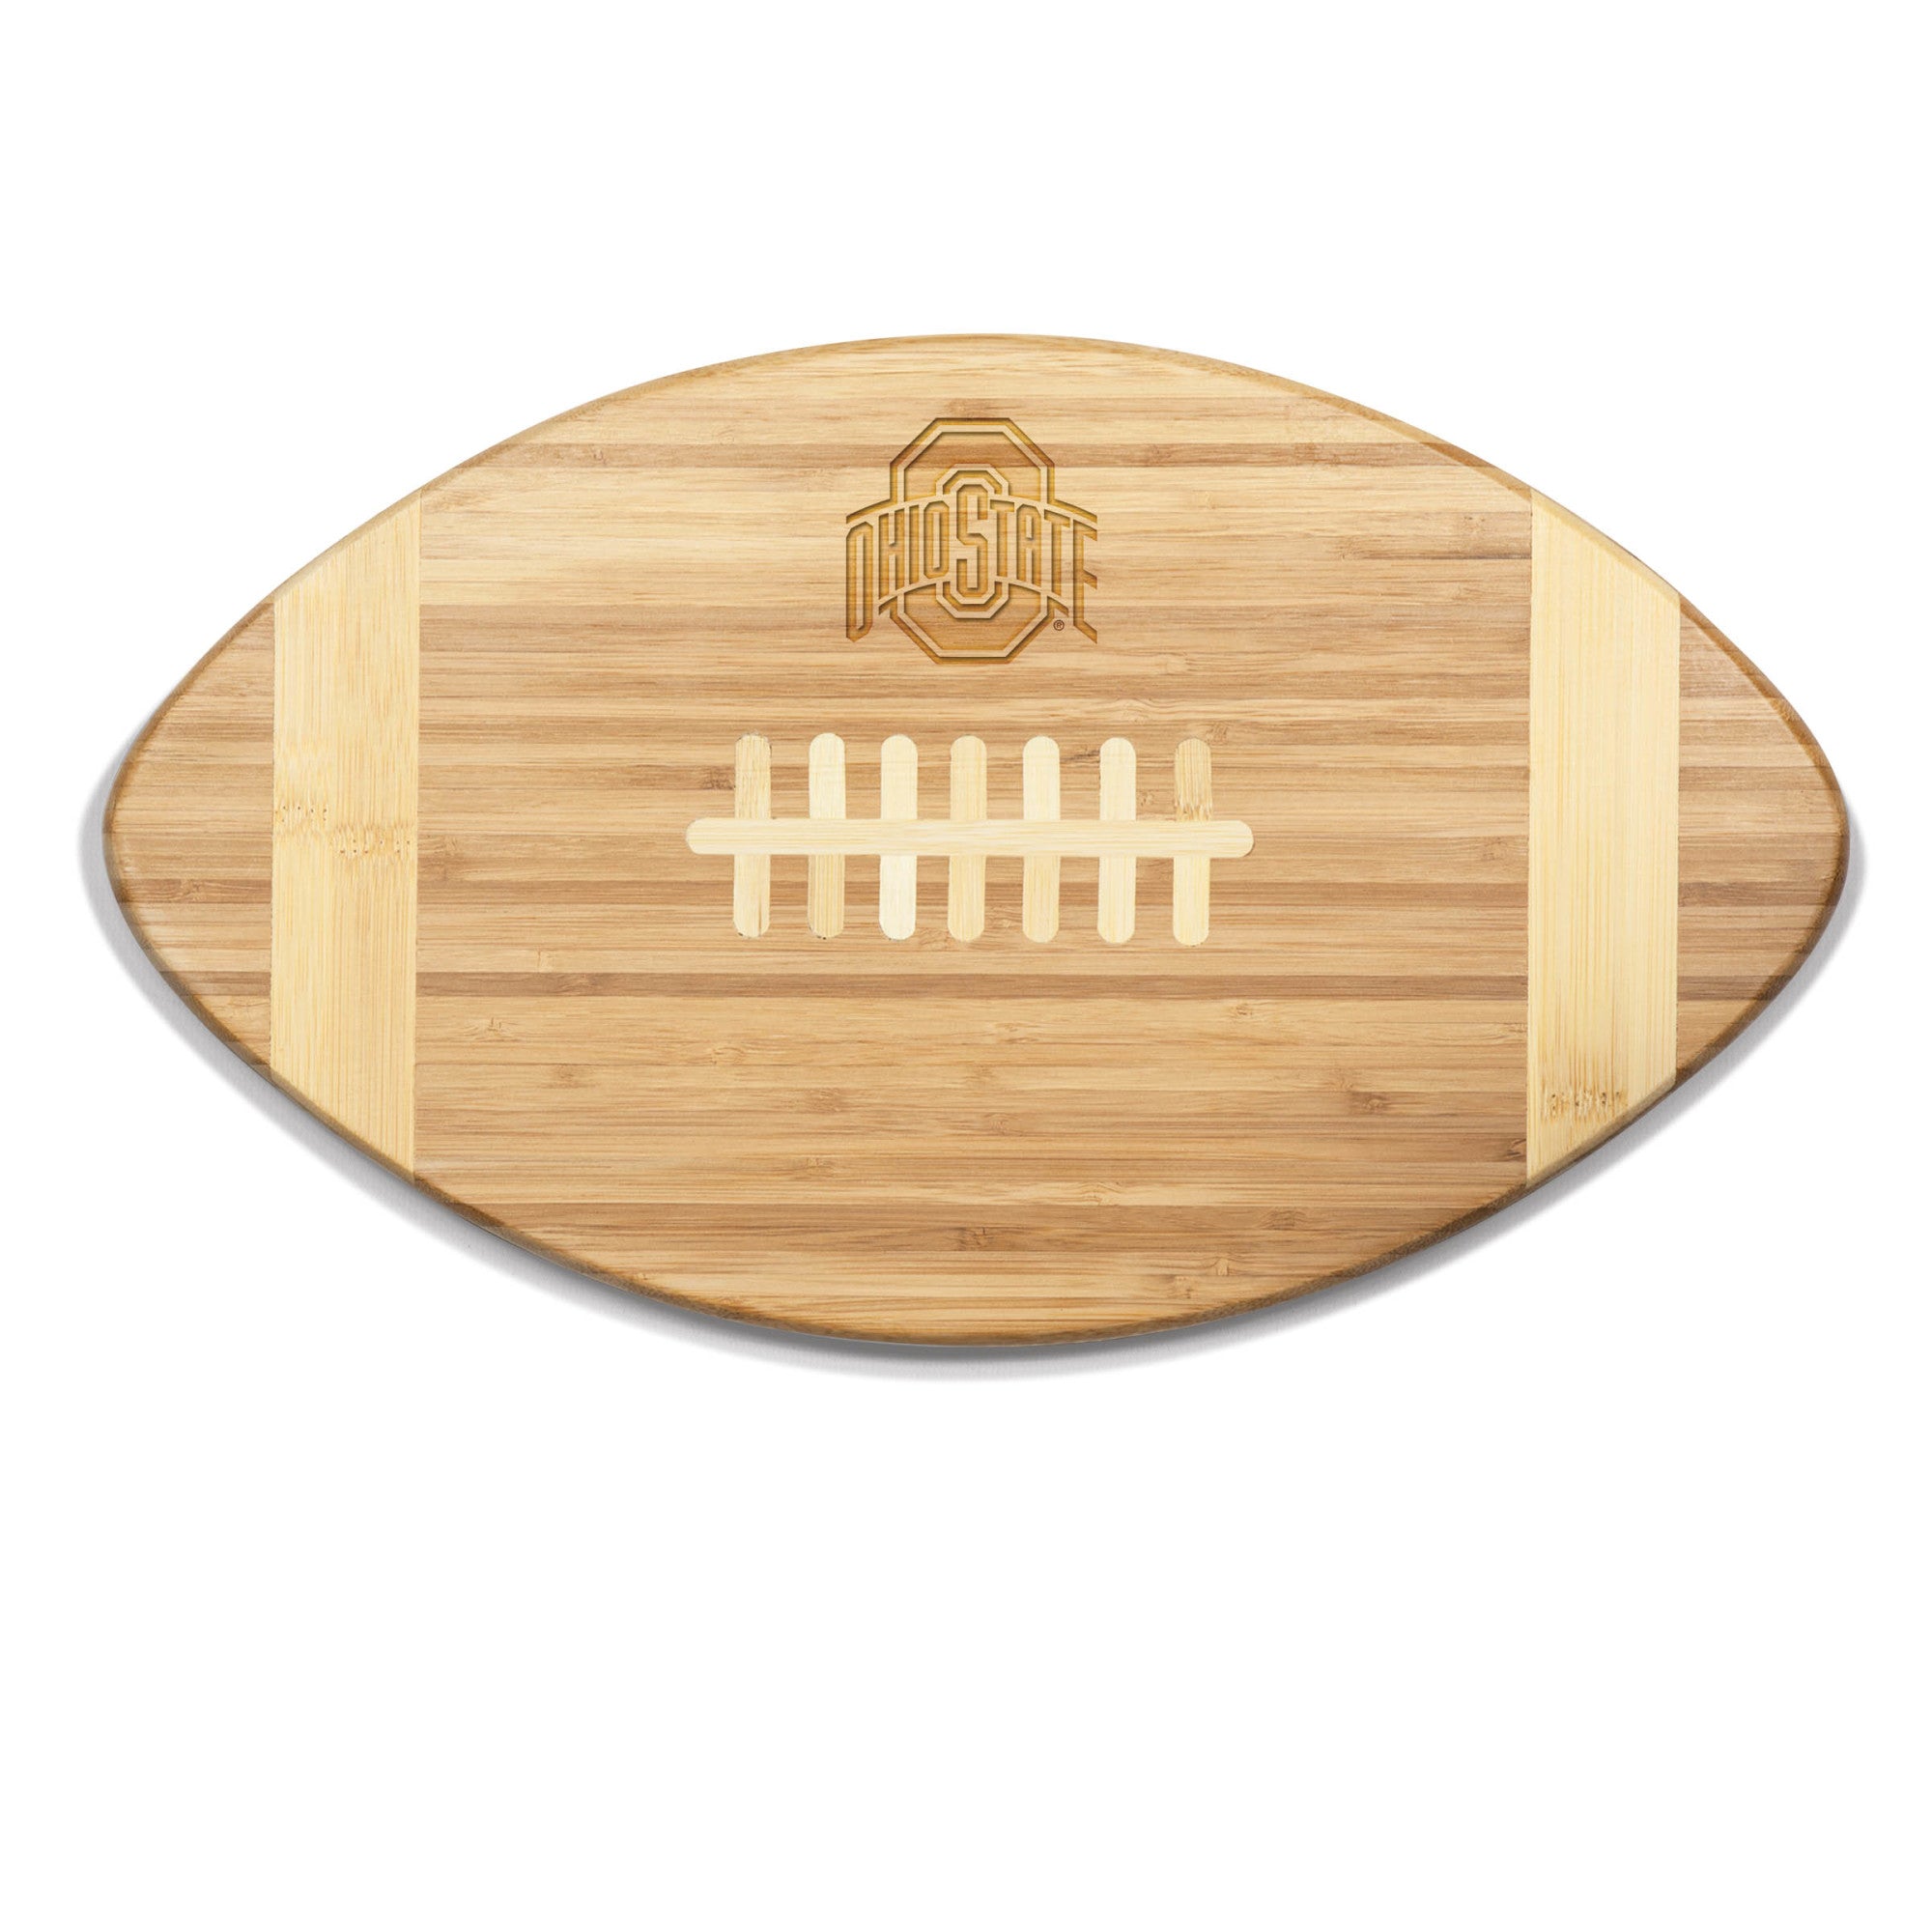 Ohio State Buckeyes - Touchdown! Football Cutting Board & Serving Tray